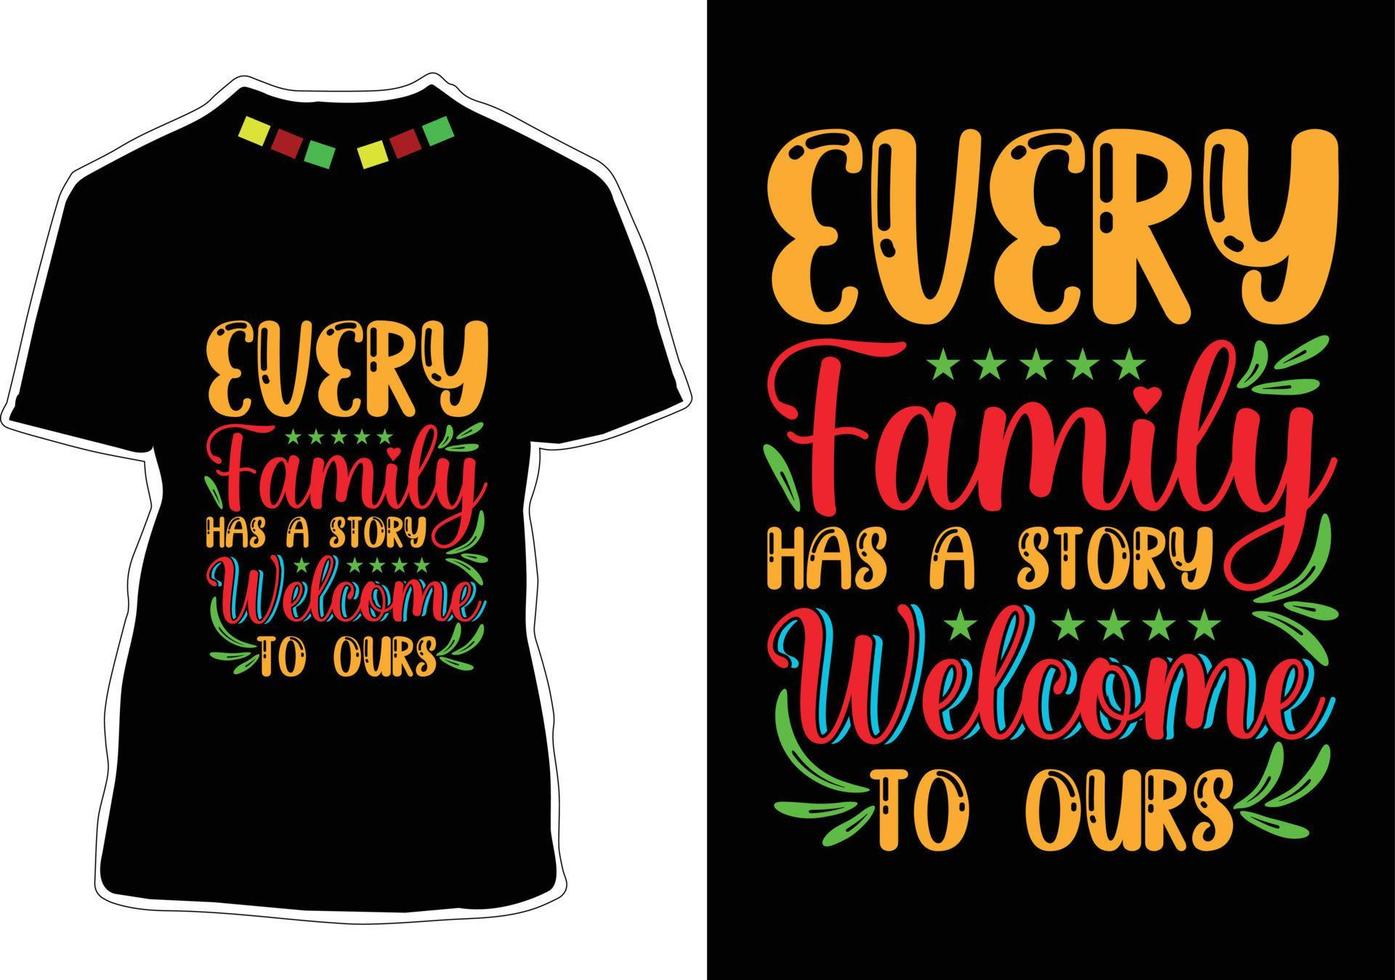 Family Quotes T-shirt Design vector